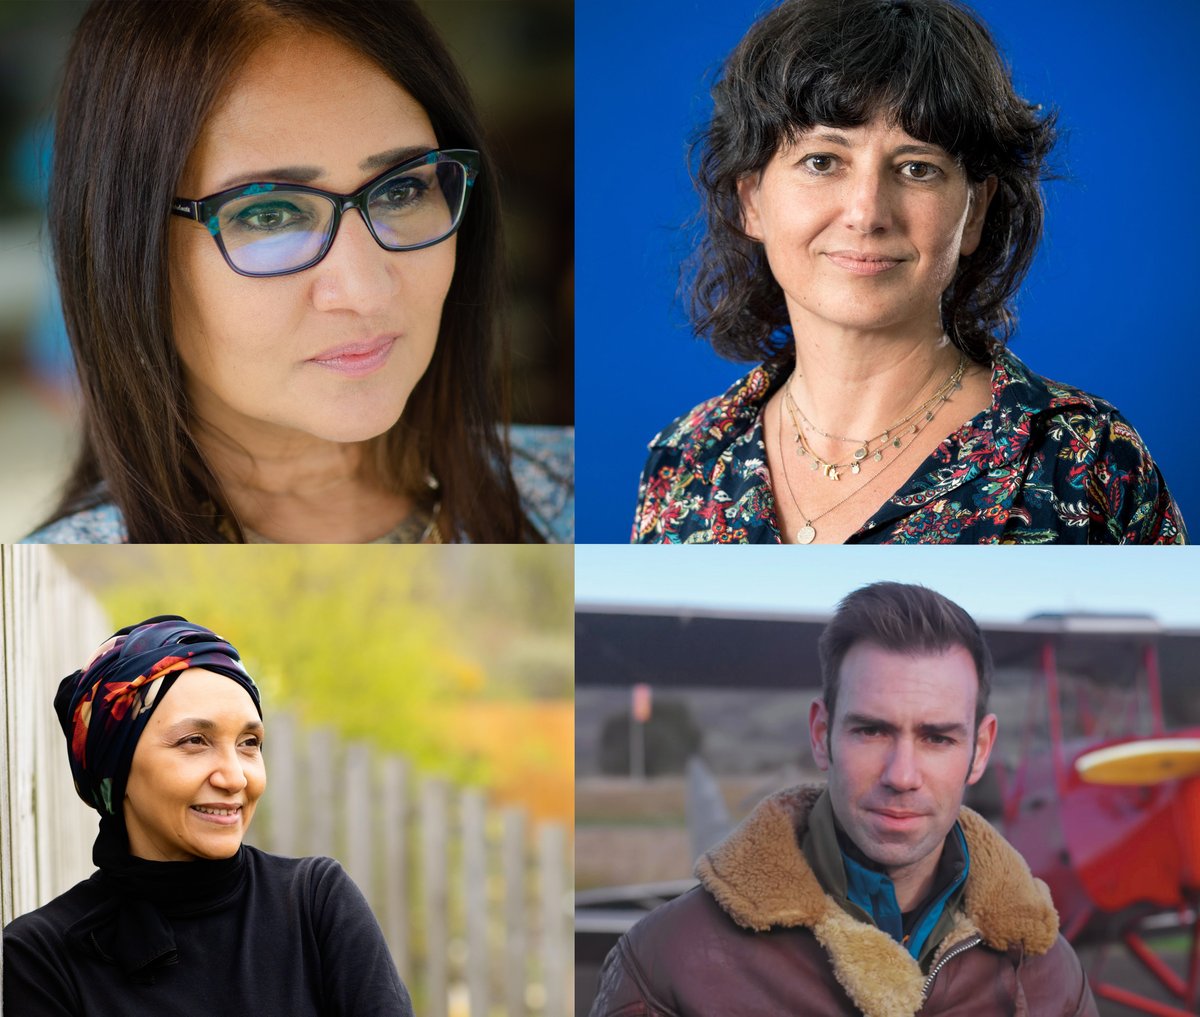 Join us on Wed 30 Sept at 7pm and explore how @EUWriters2020 deal with notions of border, identity and migration. With: Leila Aboulela, @Kapka_Kassabova, Ananda Devi and @Jdcrawf Info: europeanwriters.co.uk/events/europea… #EUwriters2020 @ifru_london @ScotGovLondon @ScotBooksInt @scotlit